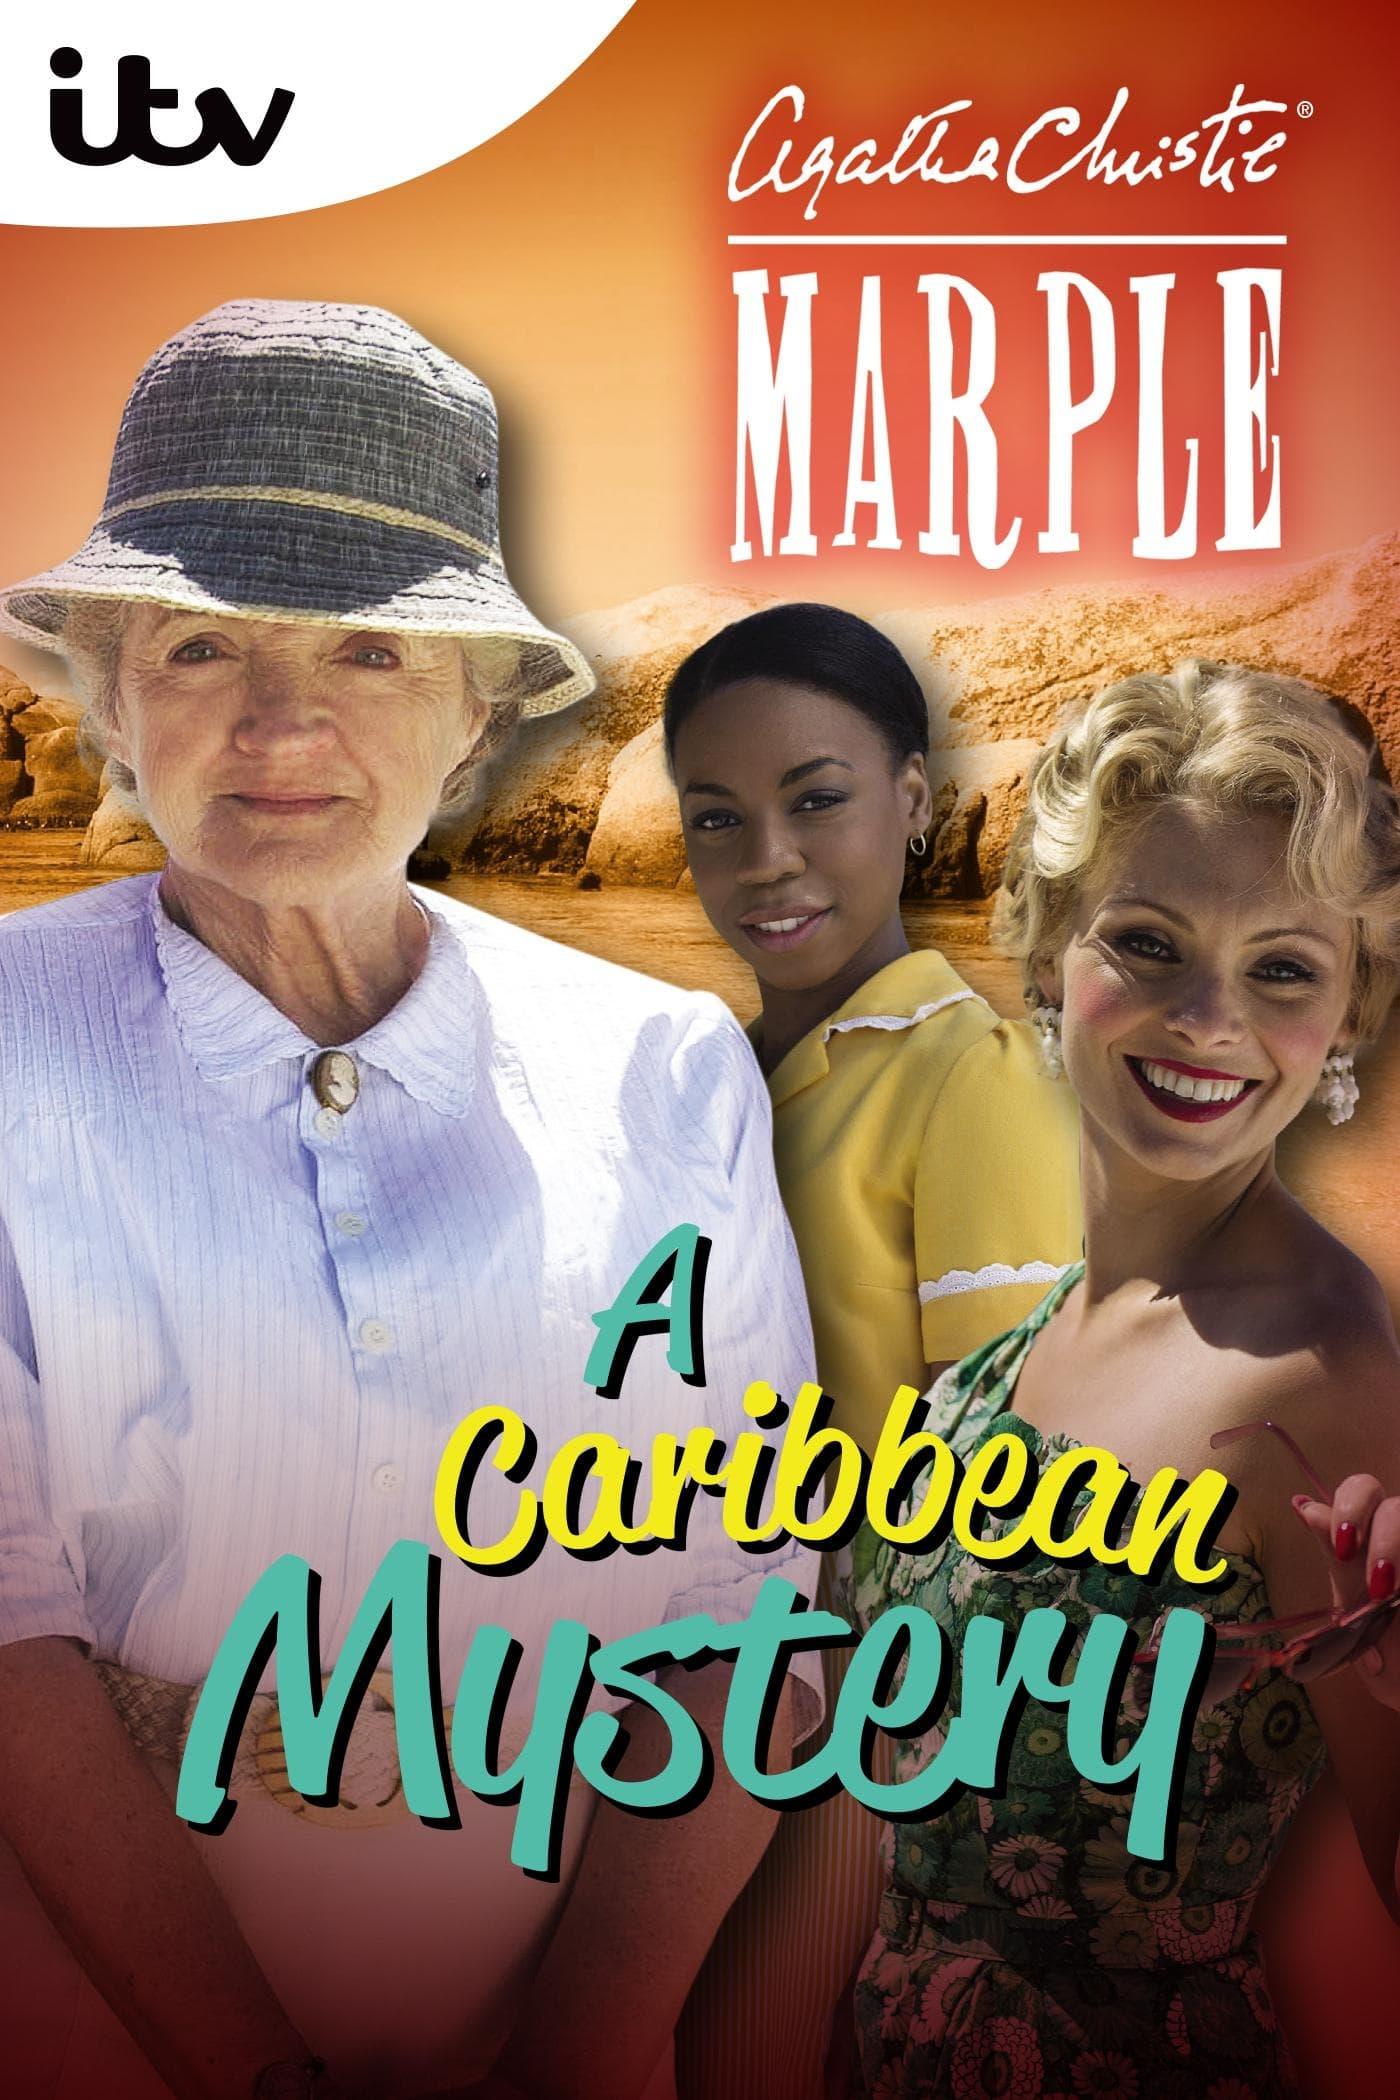 Miss Marple: A Caribbean Mystery poster